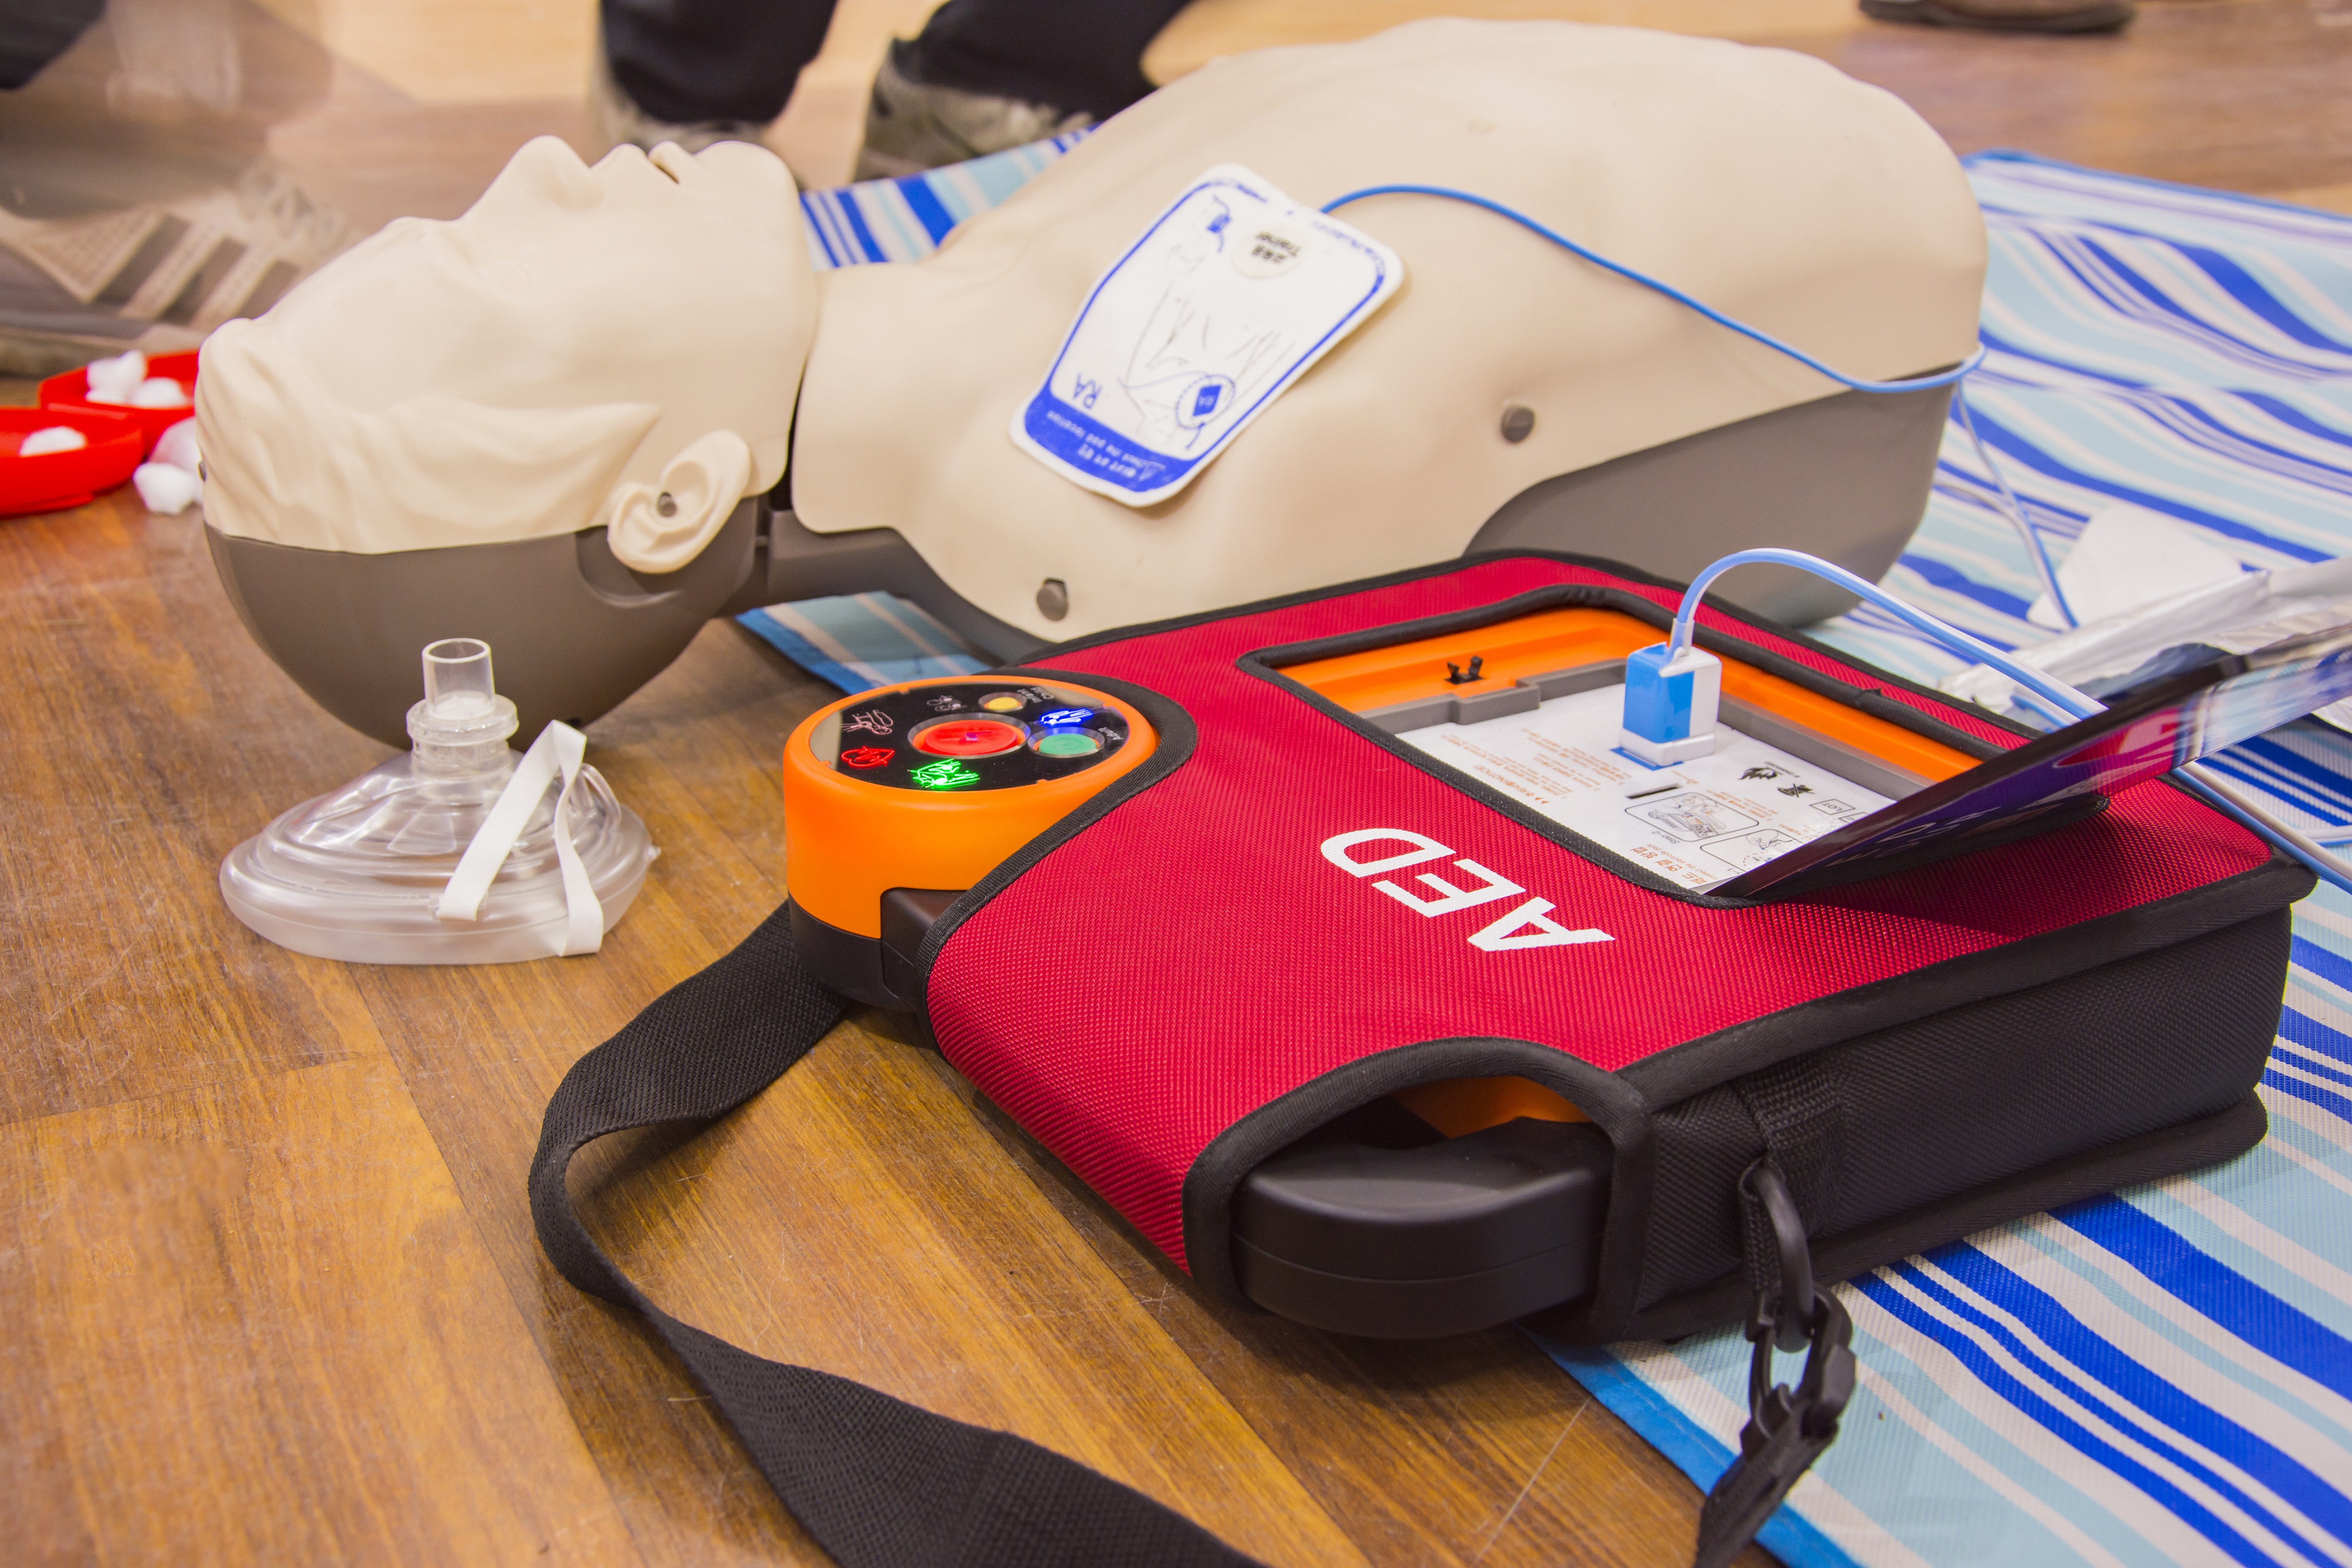 CPR AED First Aid Training Class December 3, 2022 in Salem